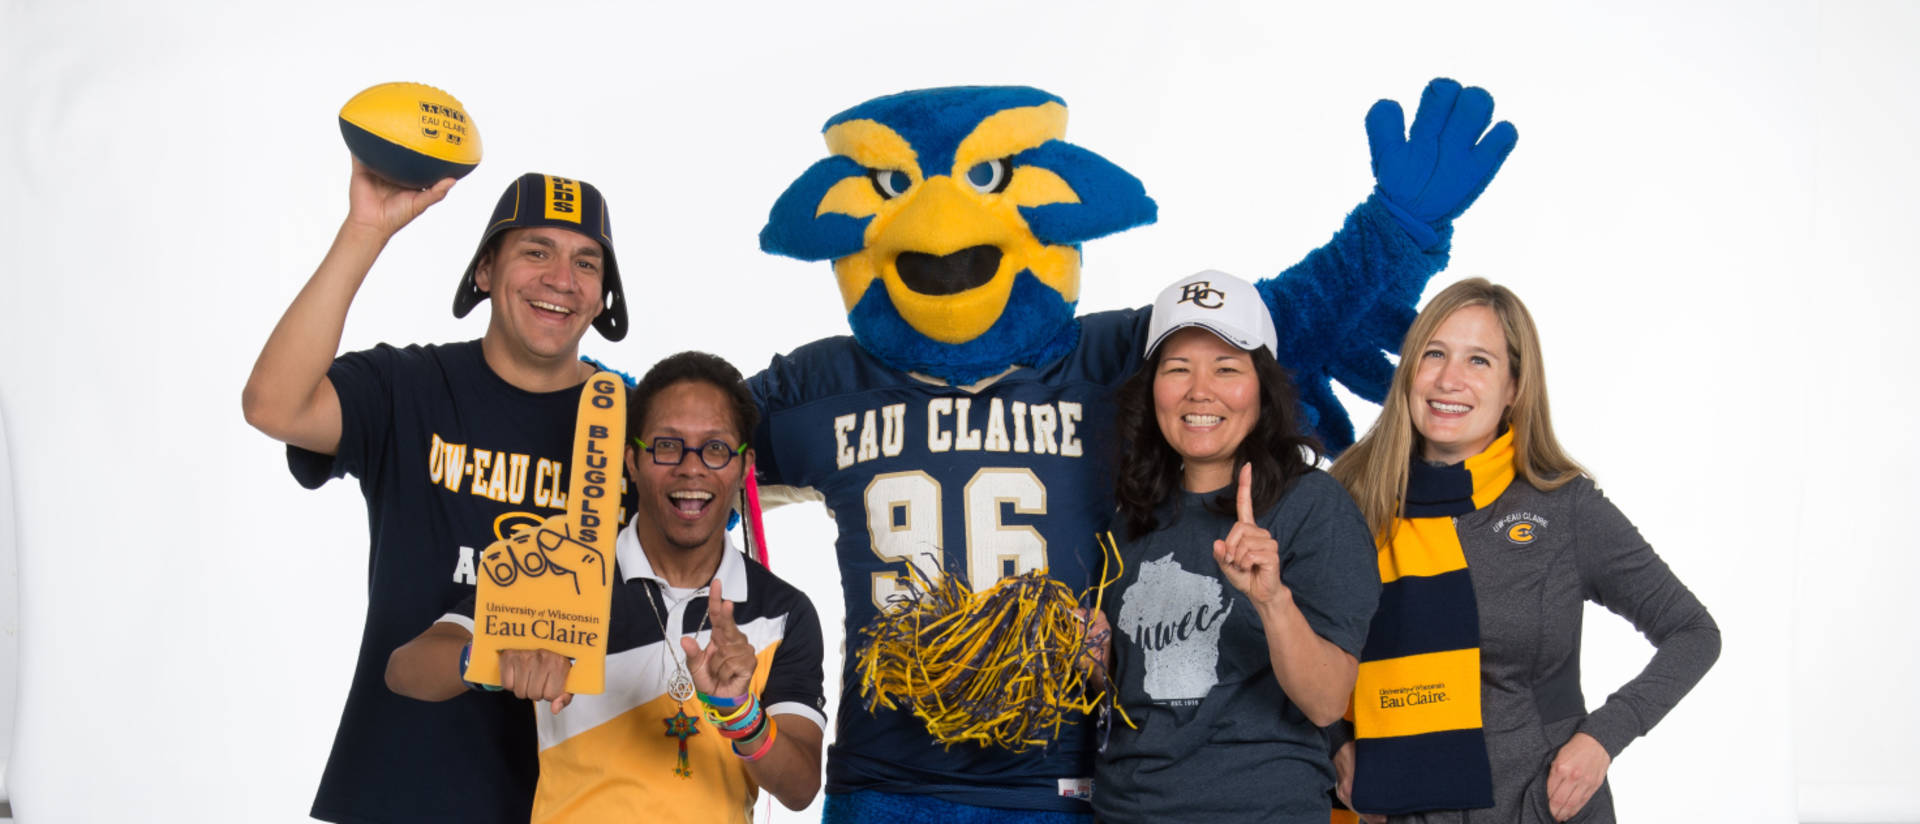 Faculty modeling Blugold apparel during a photoshoot